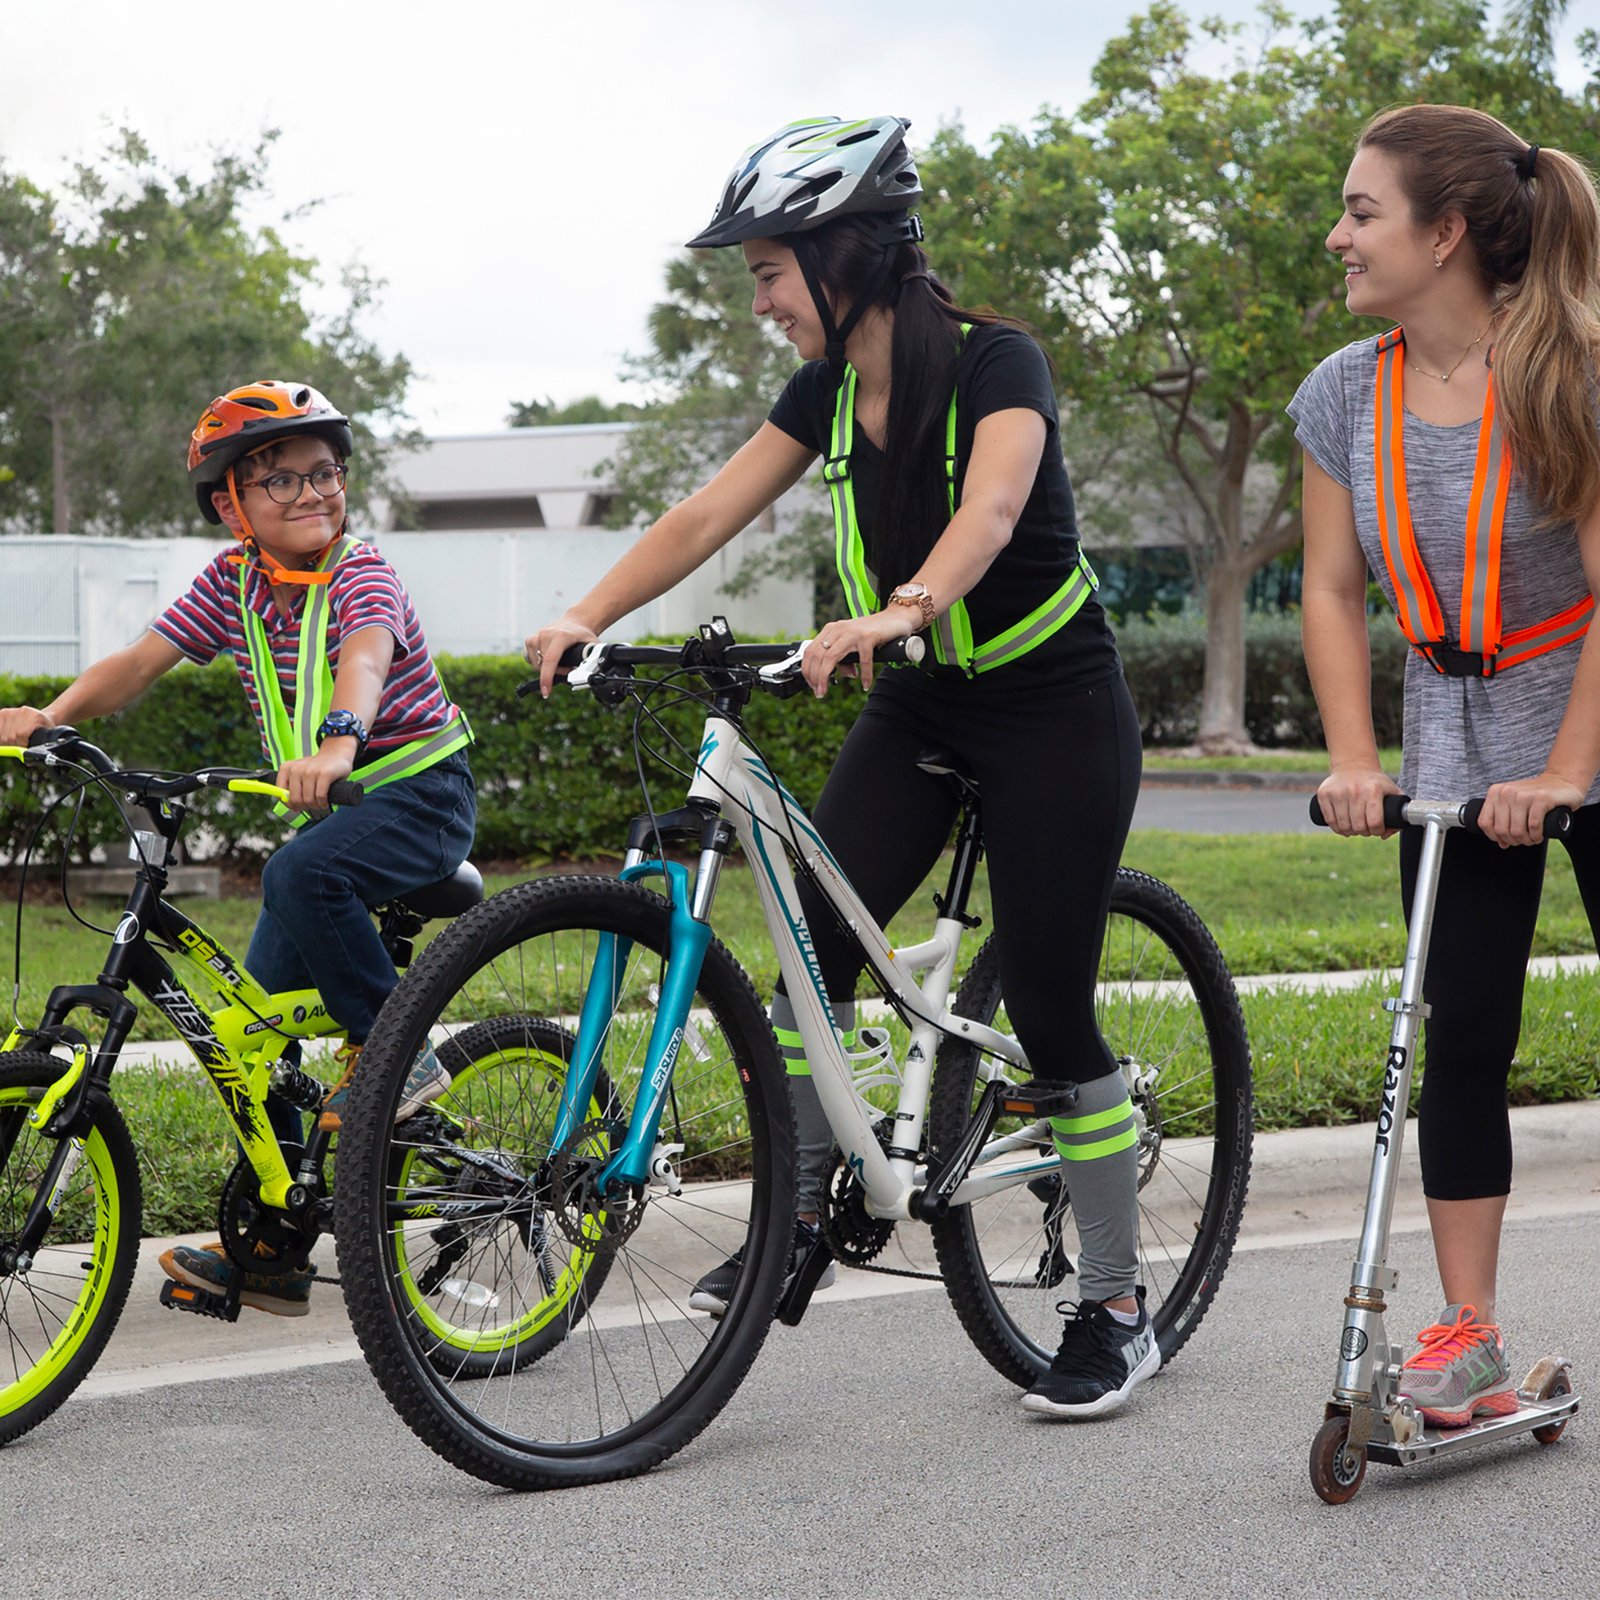 Shows one boy and 2 young ladies riding bike and scooter on the road wearing a the hi visibility safety suspenders for play